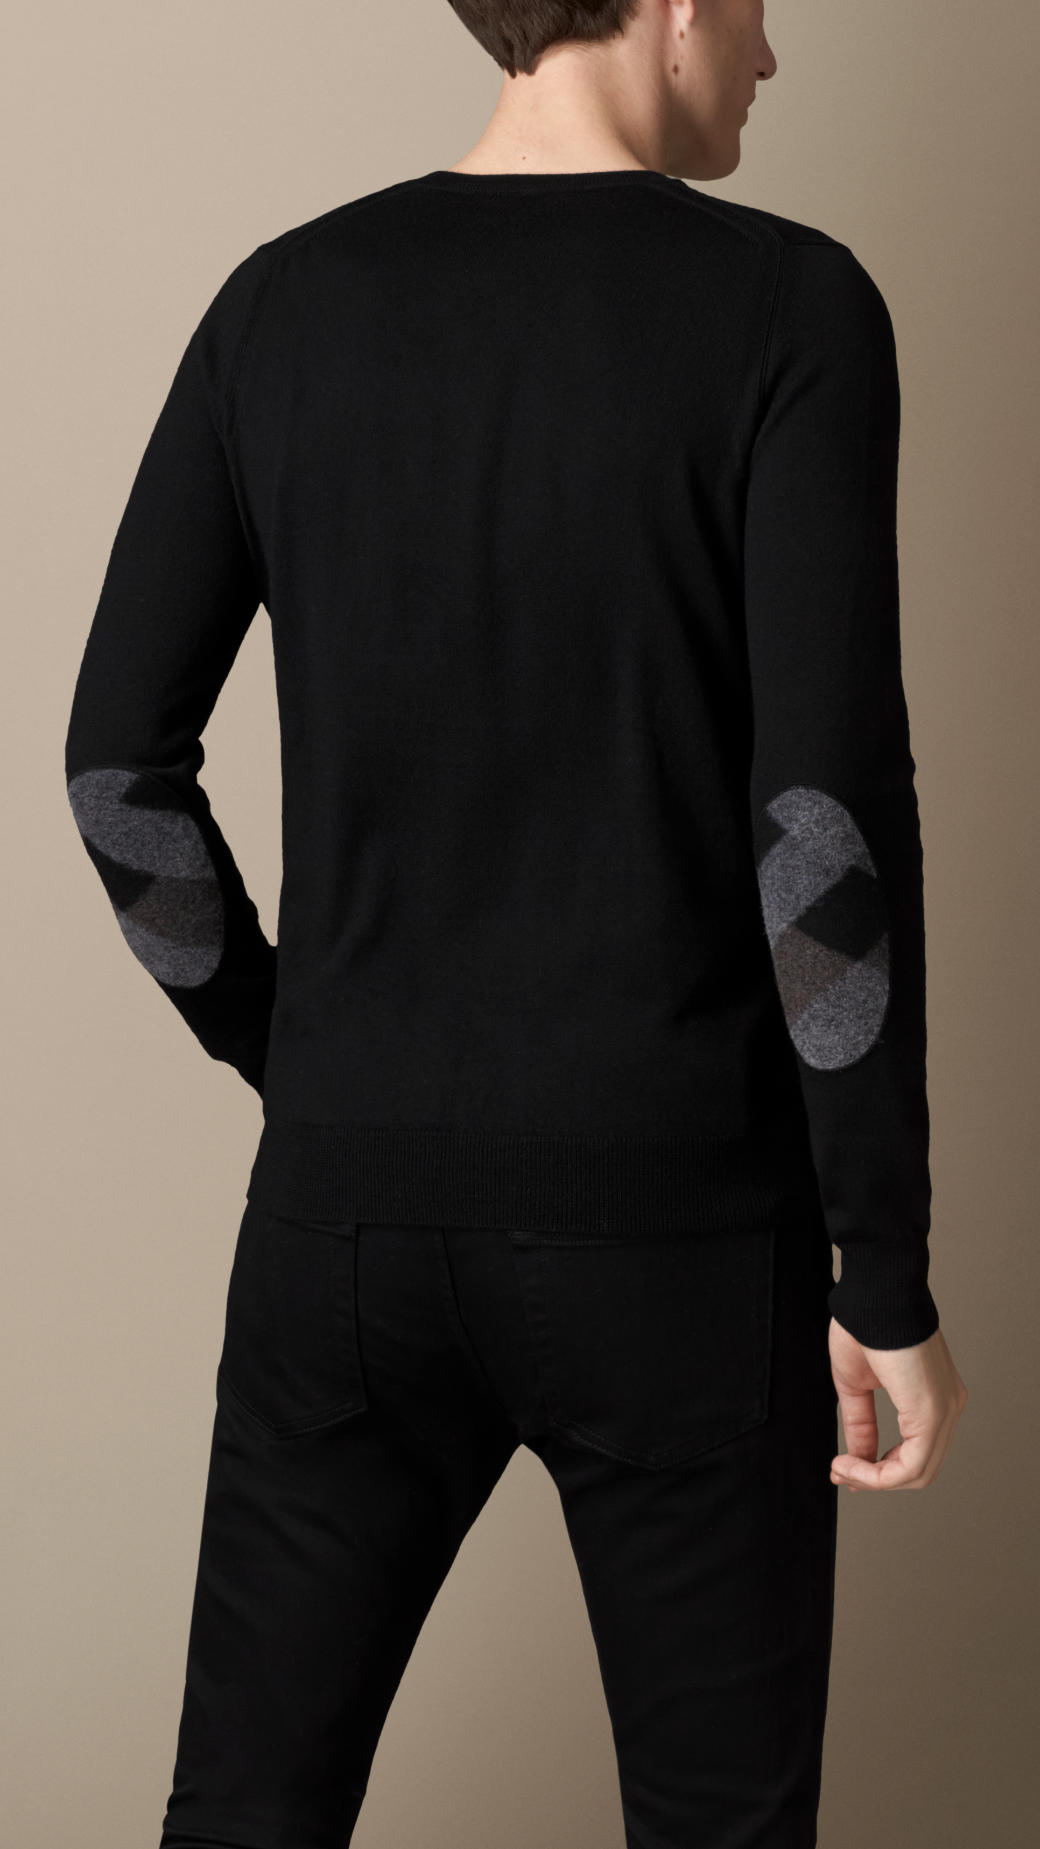 burberry mens sweater with elbow patches